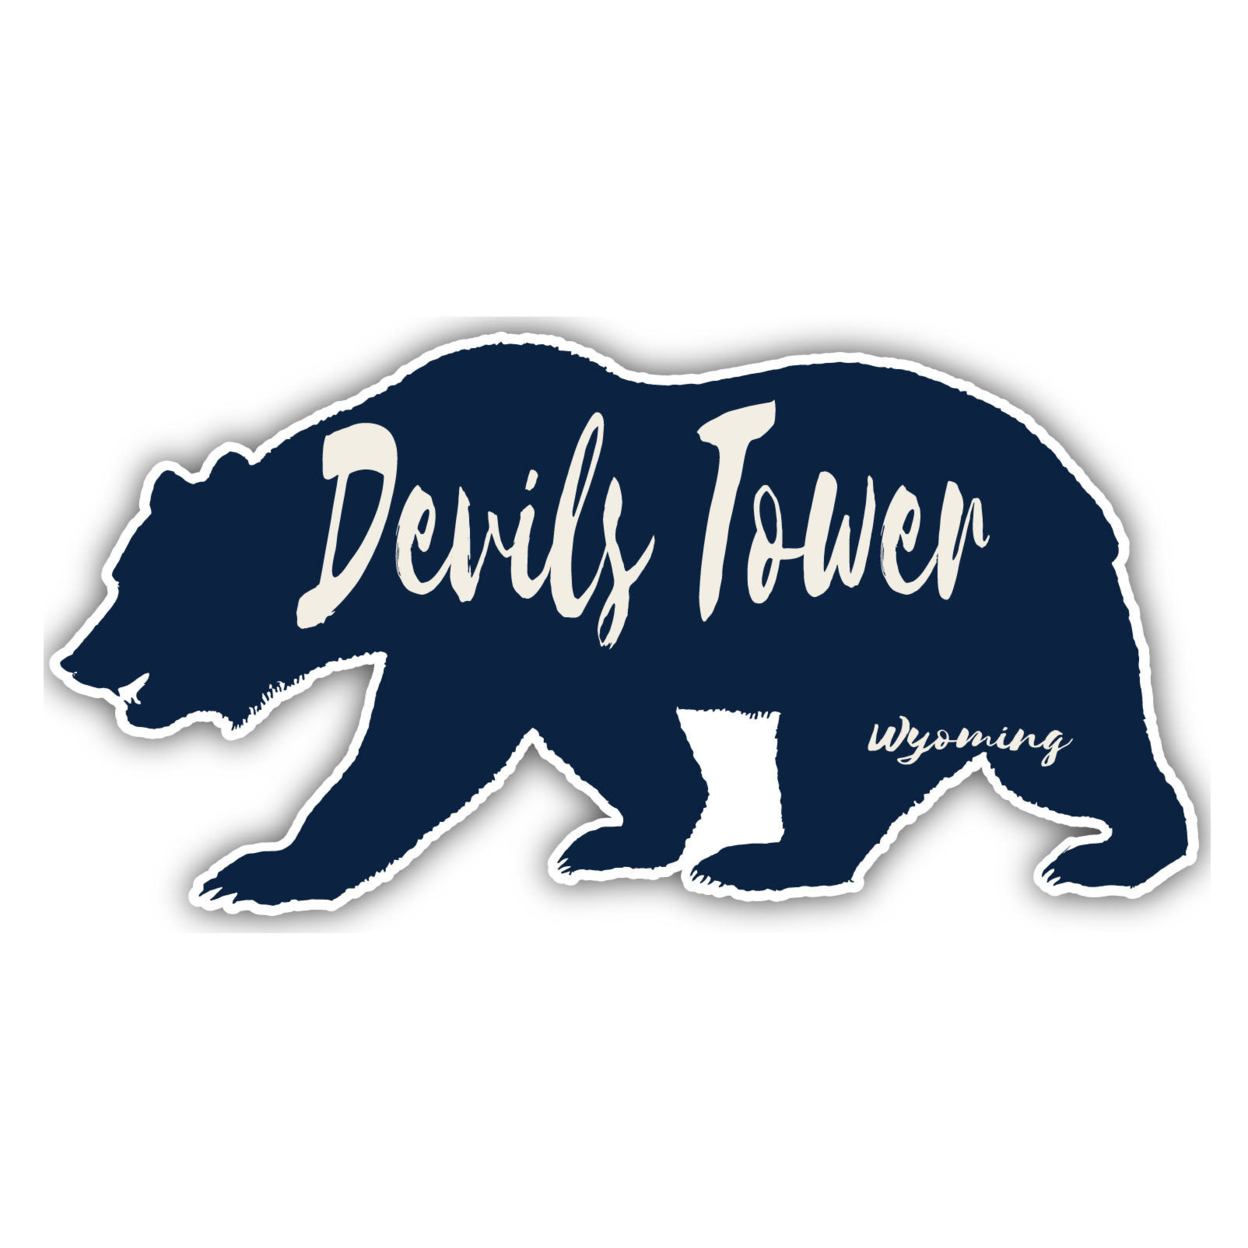 Devils Tower Wyoming Souvenir Decorative Stickers (Choose Theme And Size) - Single Unit, 8-Inch, Tent